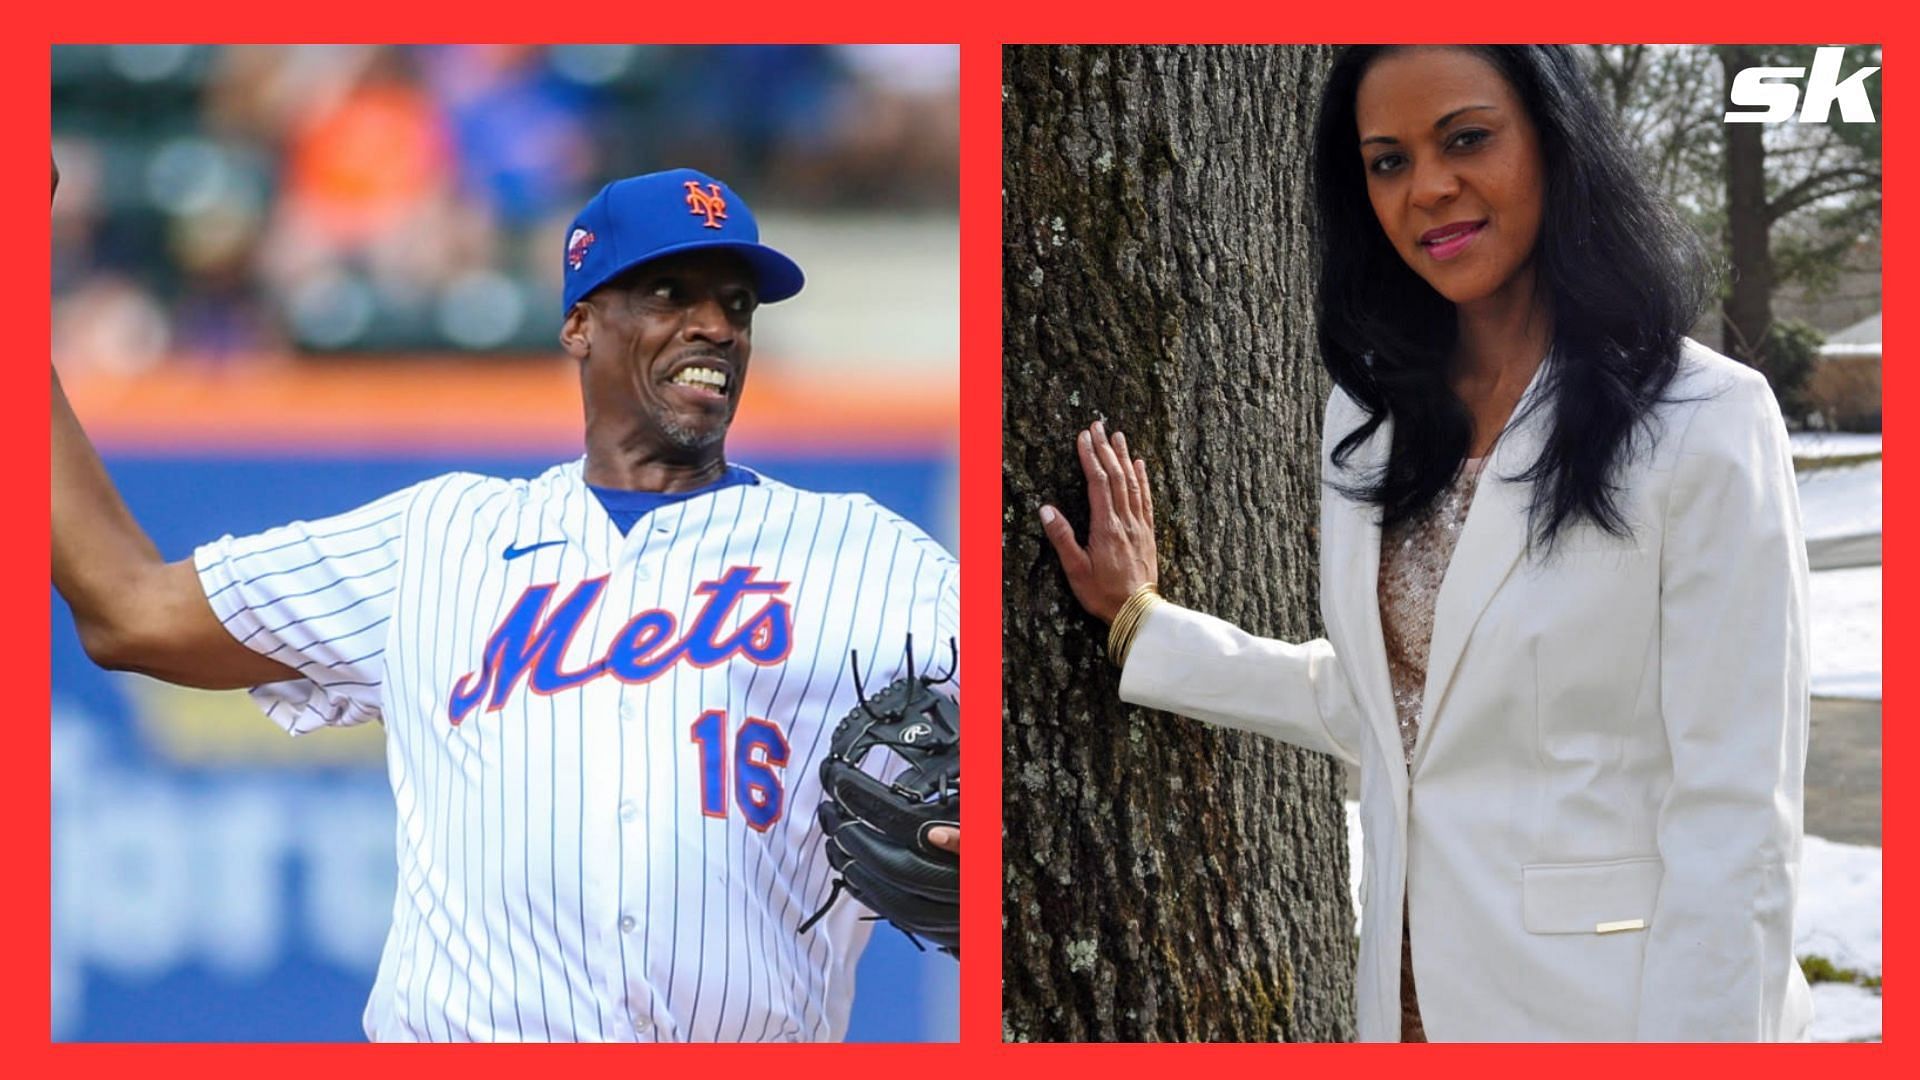 Dwight Gooden and his ex-wife Monique Gooden